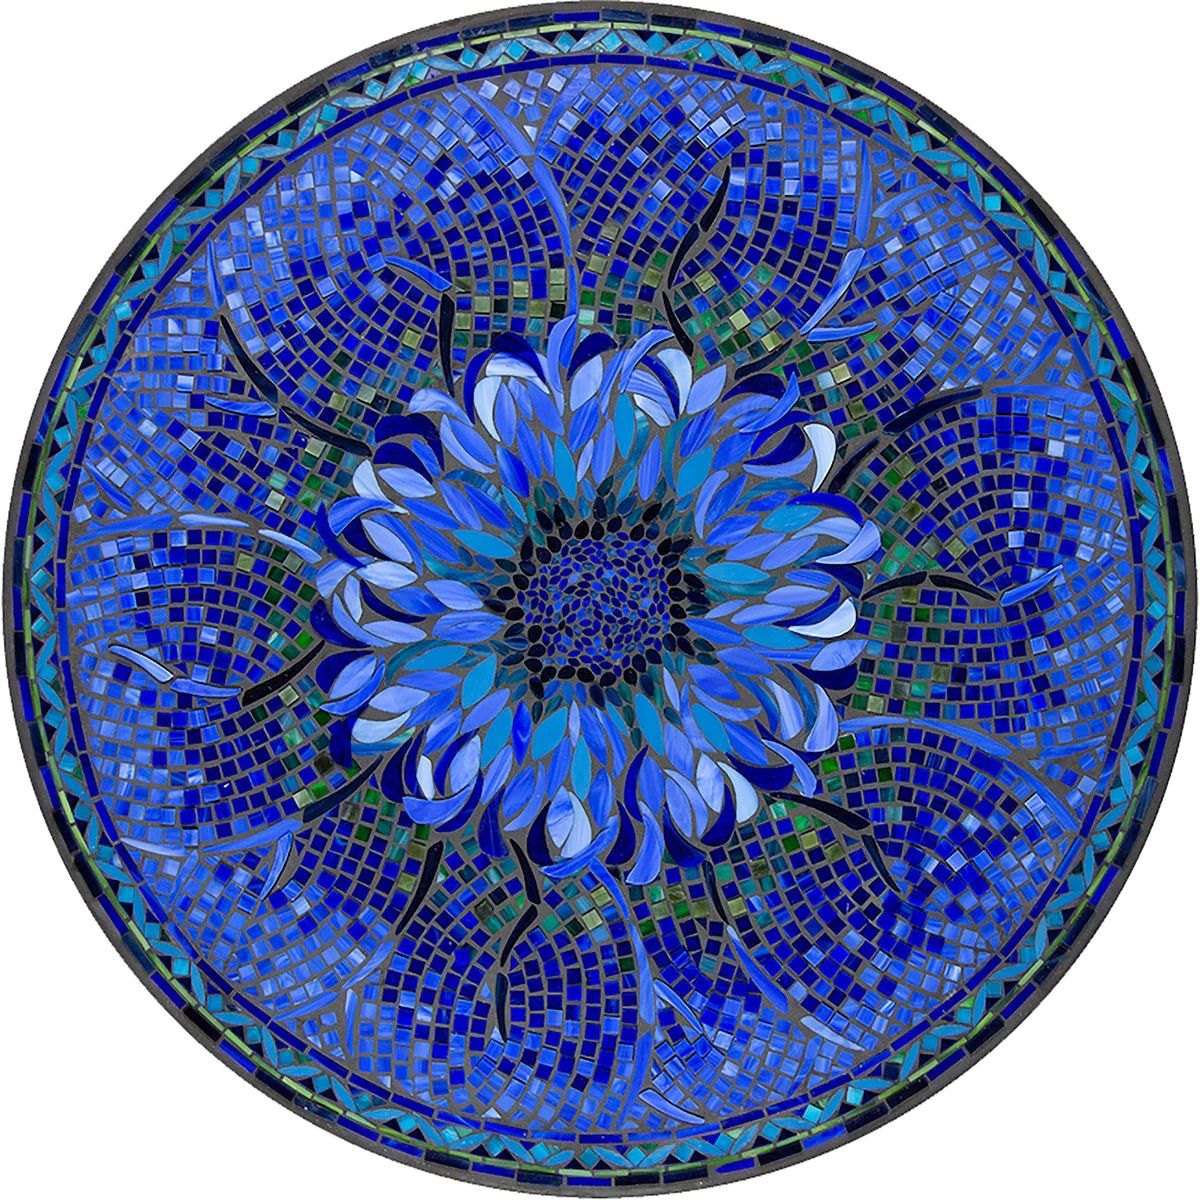 ﻿The design features a captivating blend of azure and neon blue depicting a blooming flower with detailed mosaic patterns.